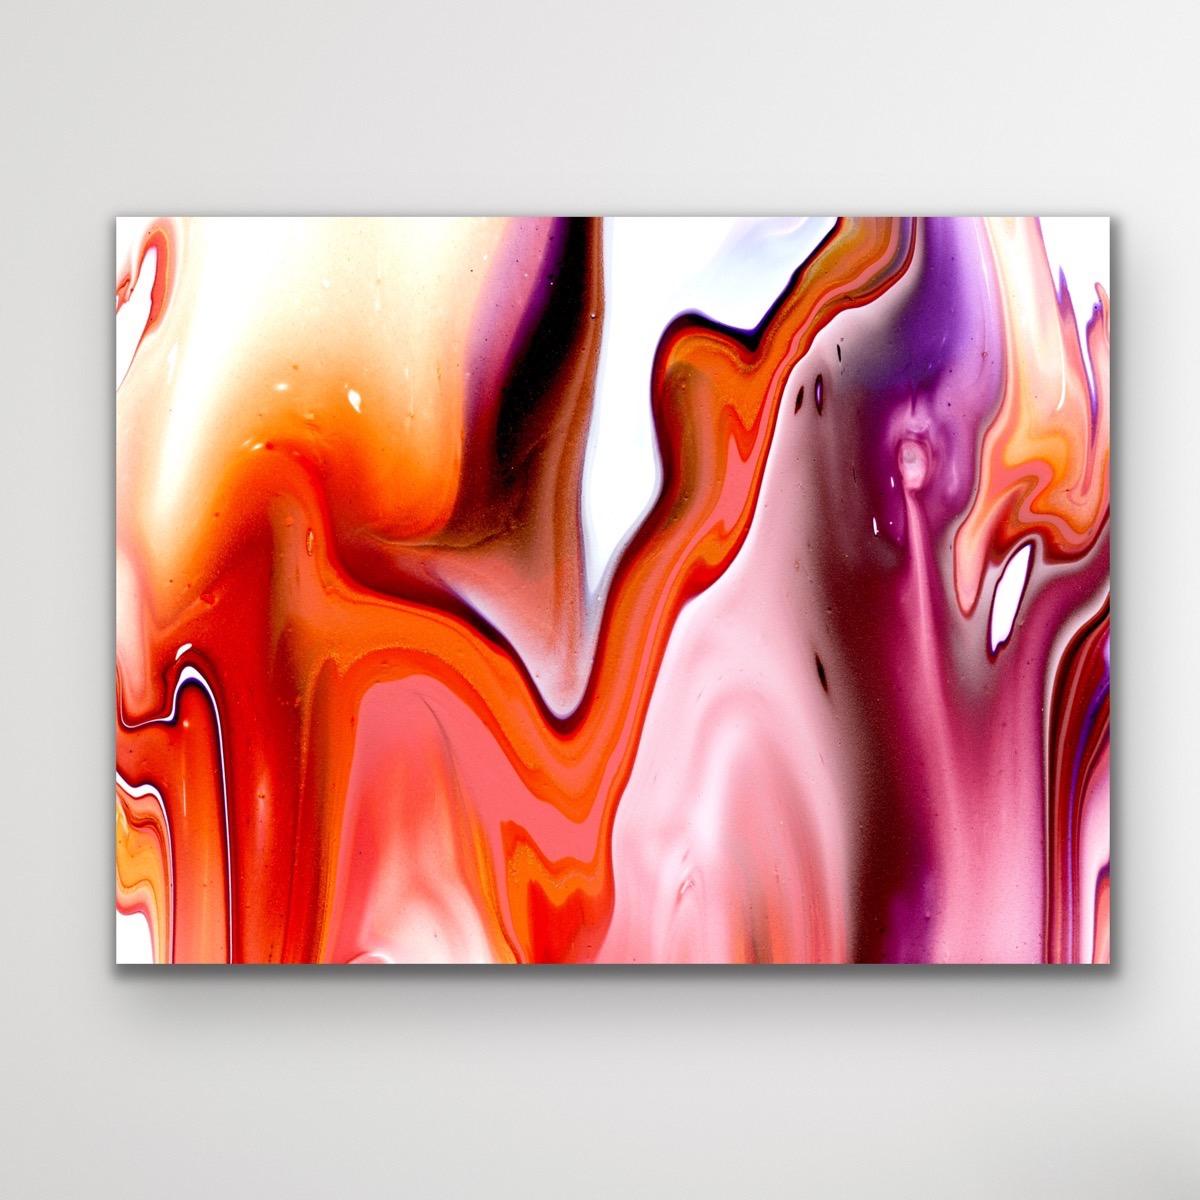 This contemporary colorful abstract painting is printed on a lightweight metal composite and comes signed by the hand-artist and ready to hang. 

-Title: Inference
-Artist: Celeste Reiter
LIMITED EDITION; 1 of 50
*This piece is a limited edition